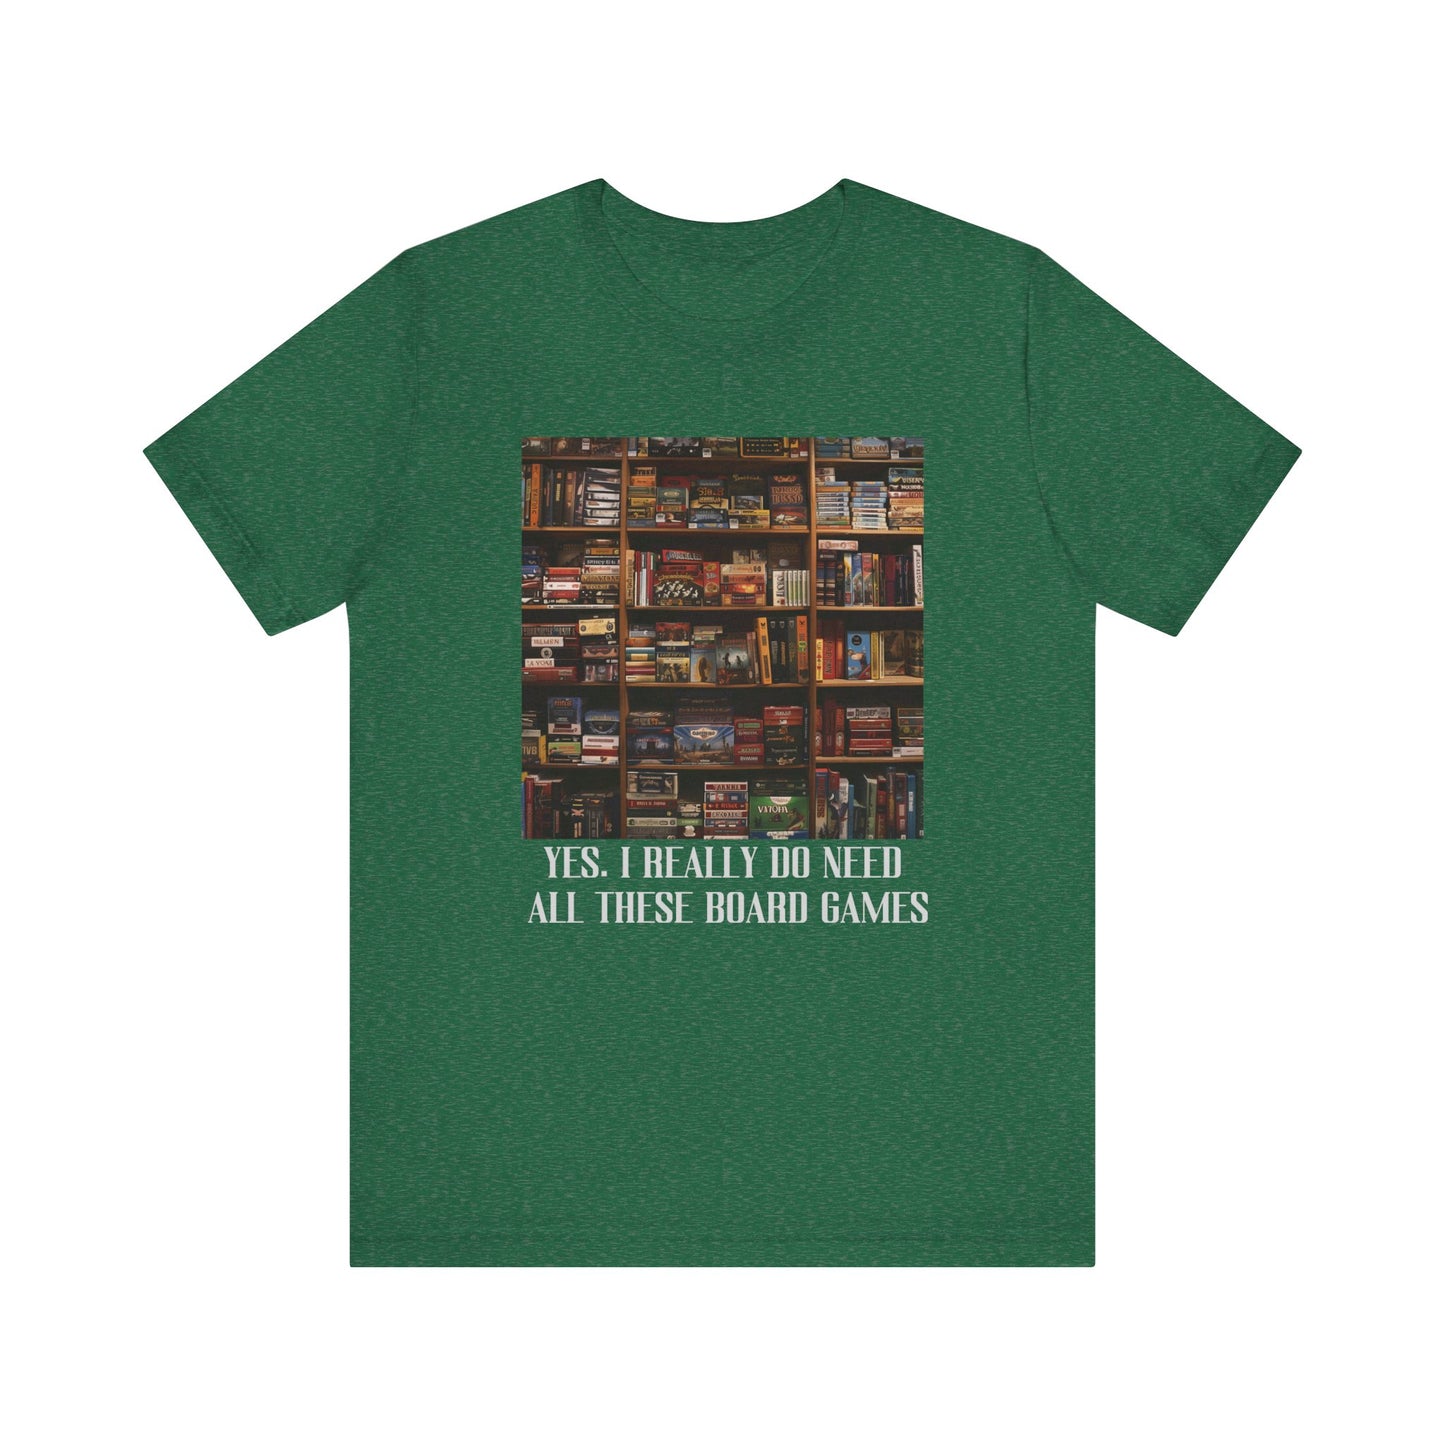 Board Game Tee Shirt, Tee shirt for Board Gamer, Great gift for Board Game Fan, Play more board games